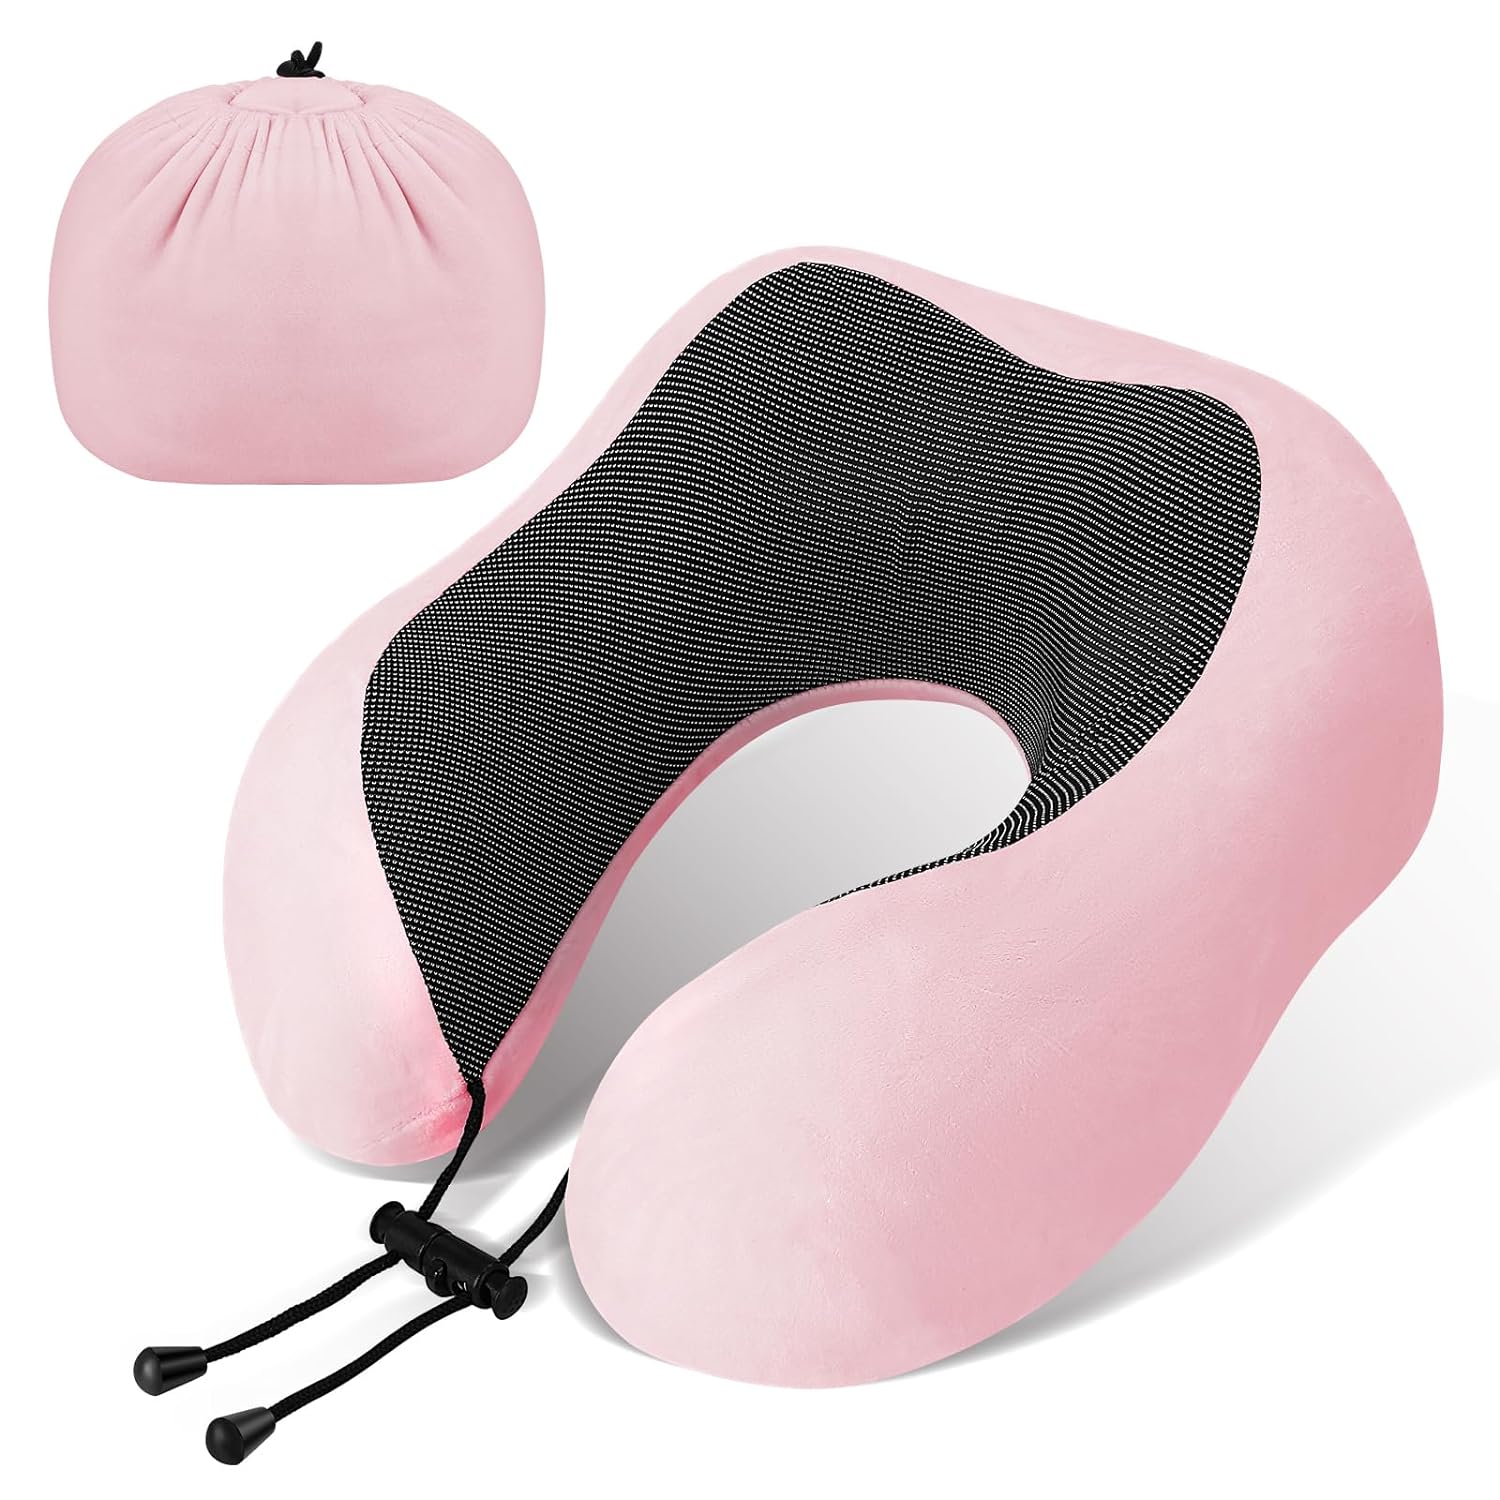 wowpower Airplane Travel Neck Pillow, 100% Pure Memory Foam (4 Seconds Rebound) on Head Support,Upgrade Portable Neck Pillow for Plane and Car Traveling Sleep 1 Pack(Pink)